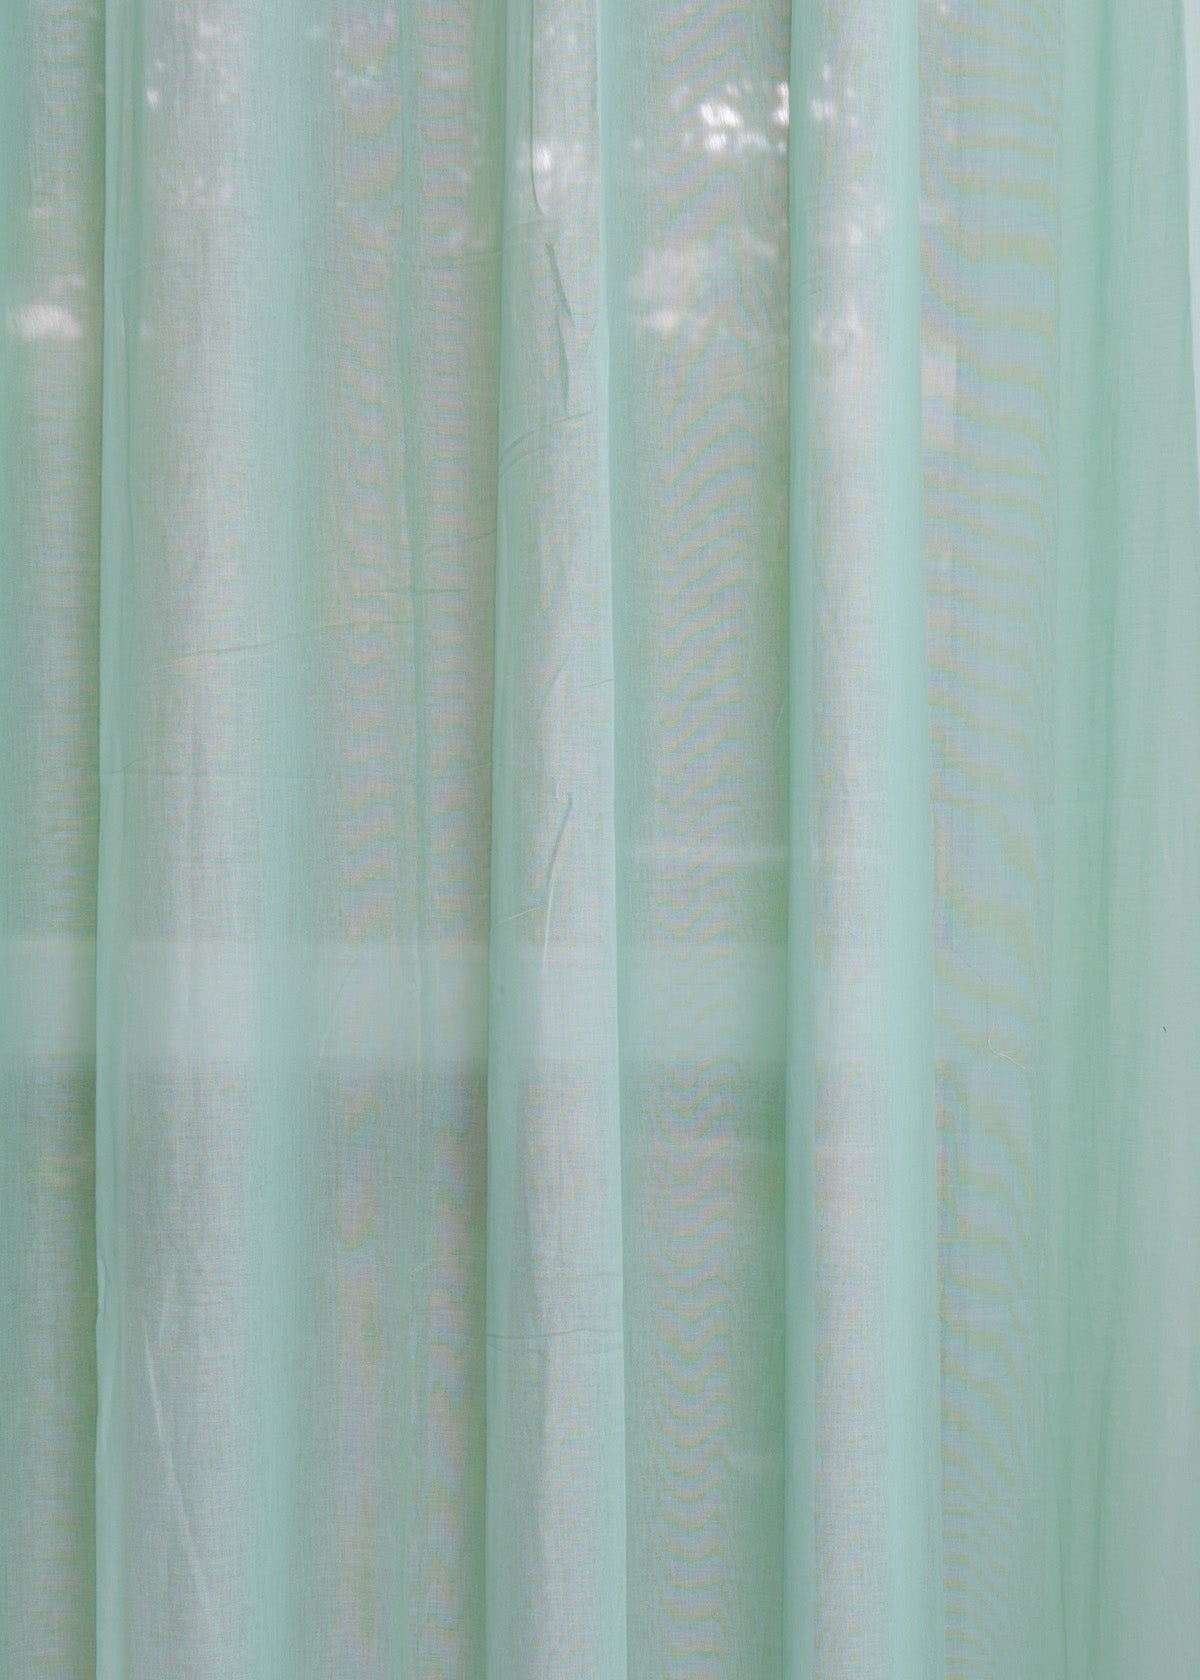 Solid Nile Blue sheer 100% Customizable Cotton plain curtain for Living room & bedroom - Light filtering